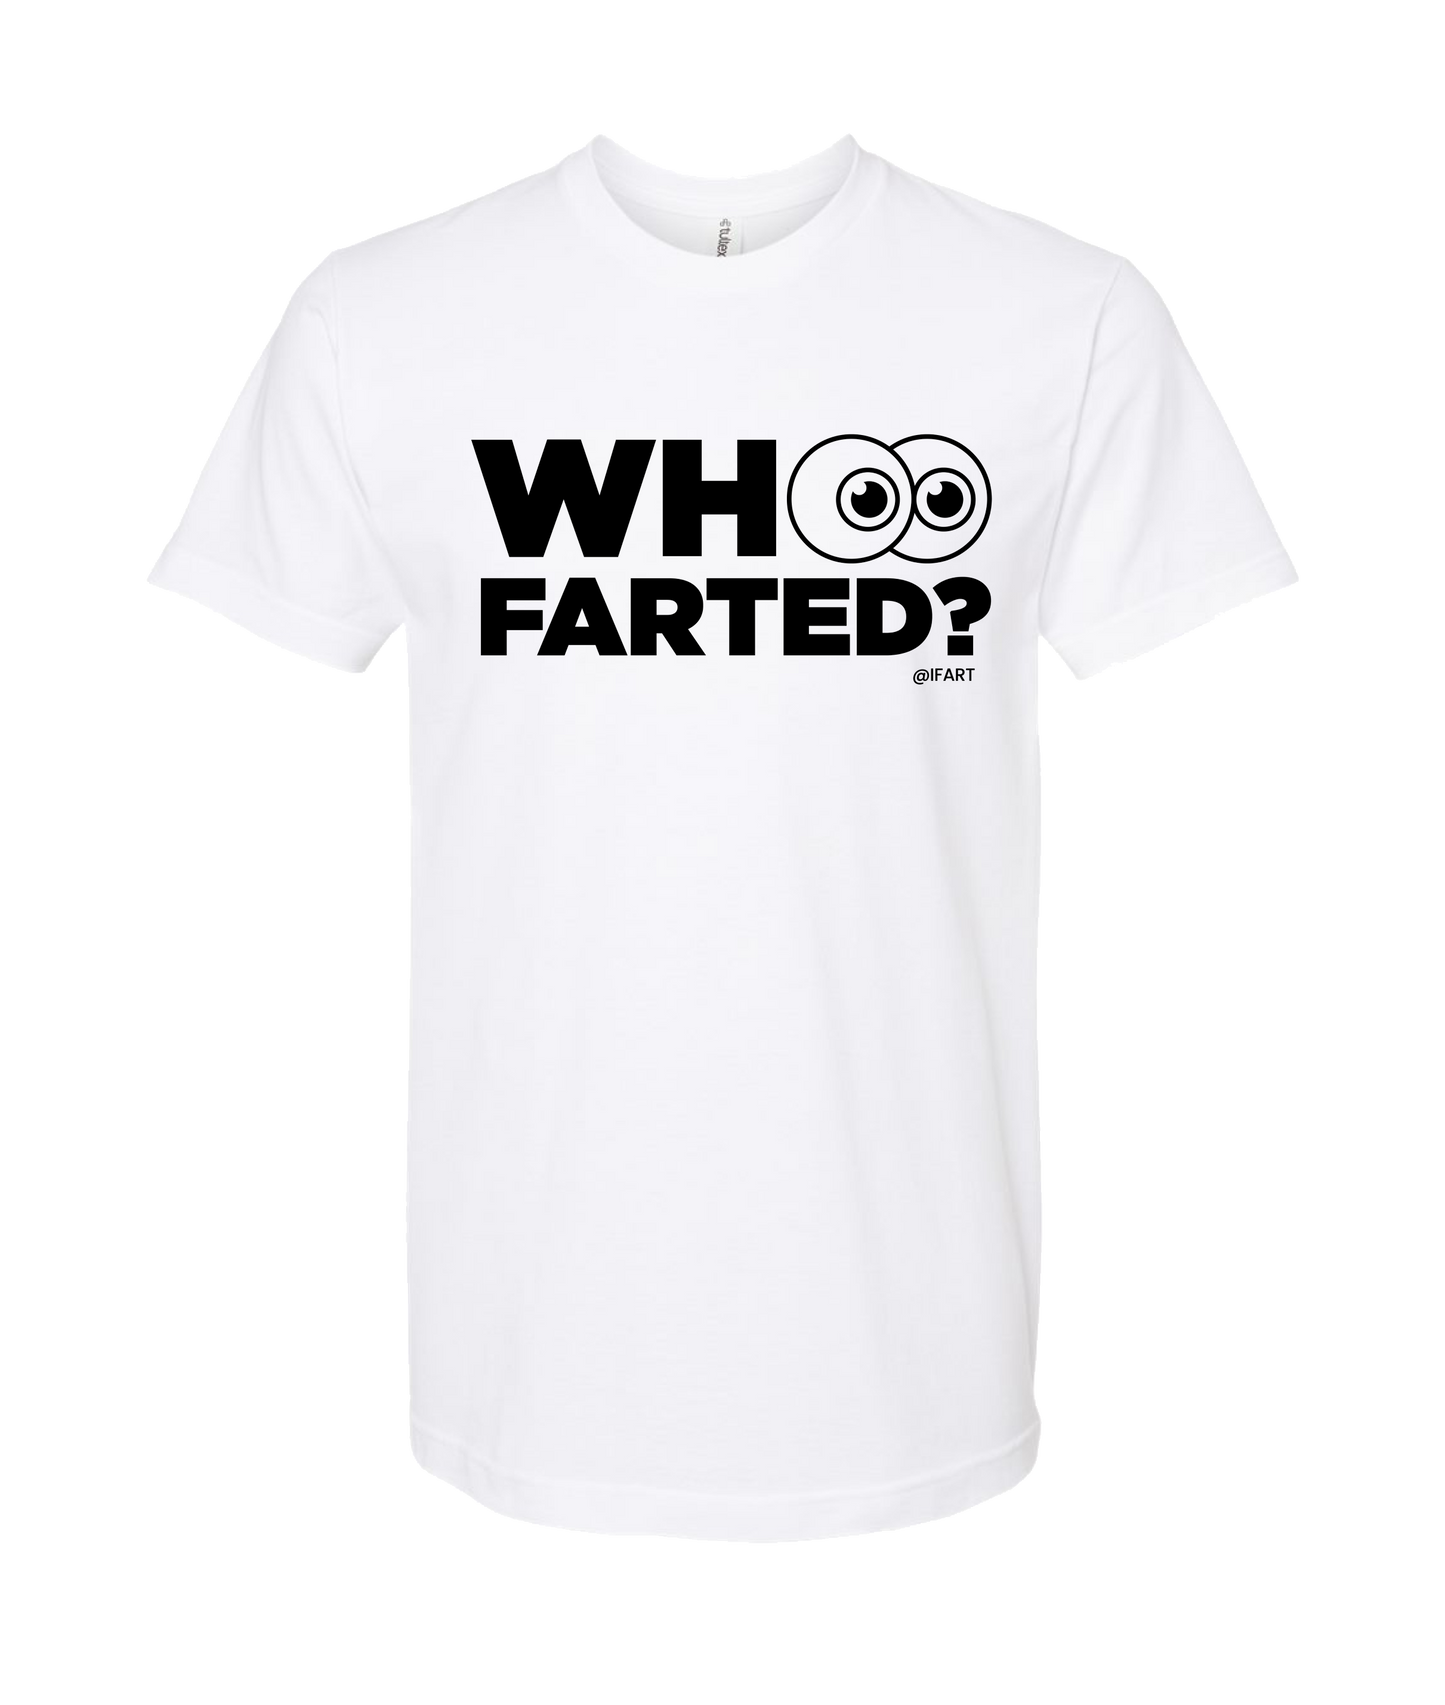 iFart - WHO FARTED? - White T-Shirt